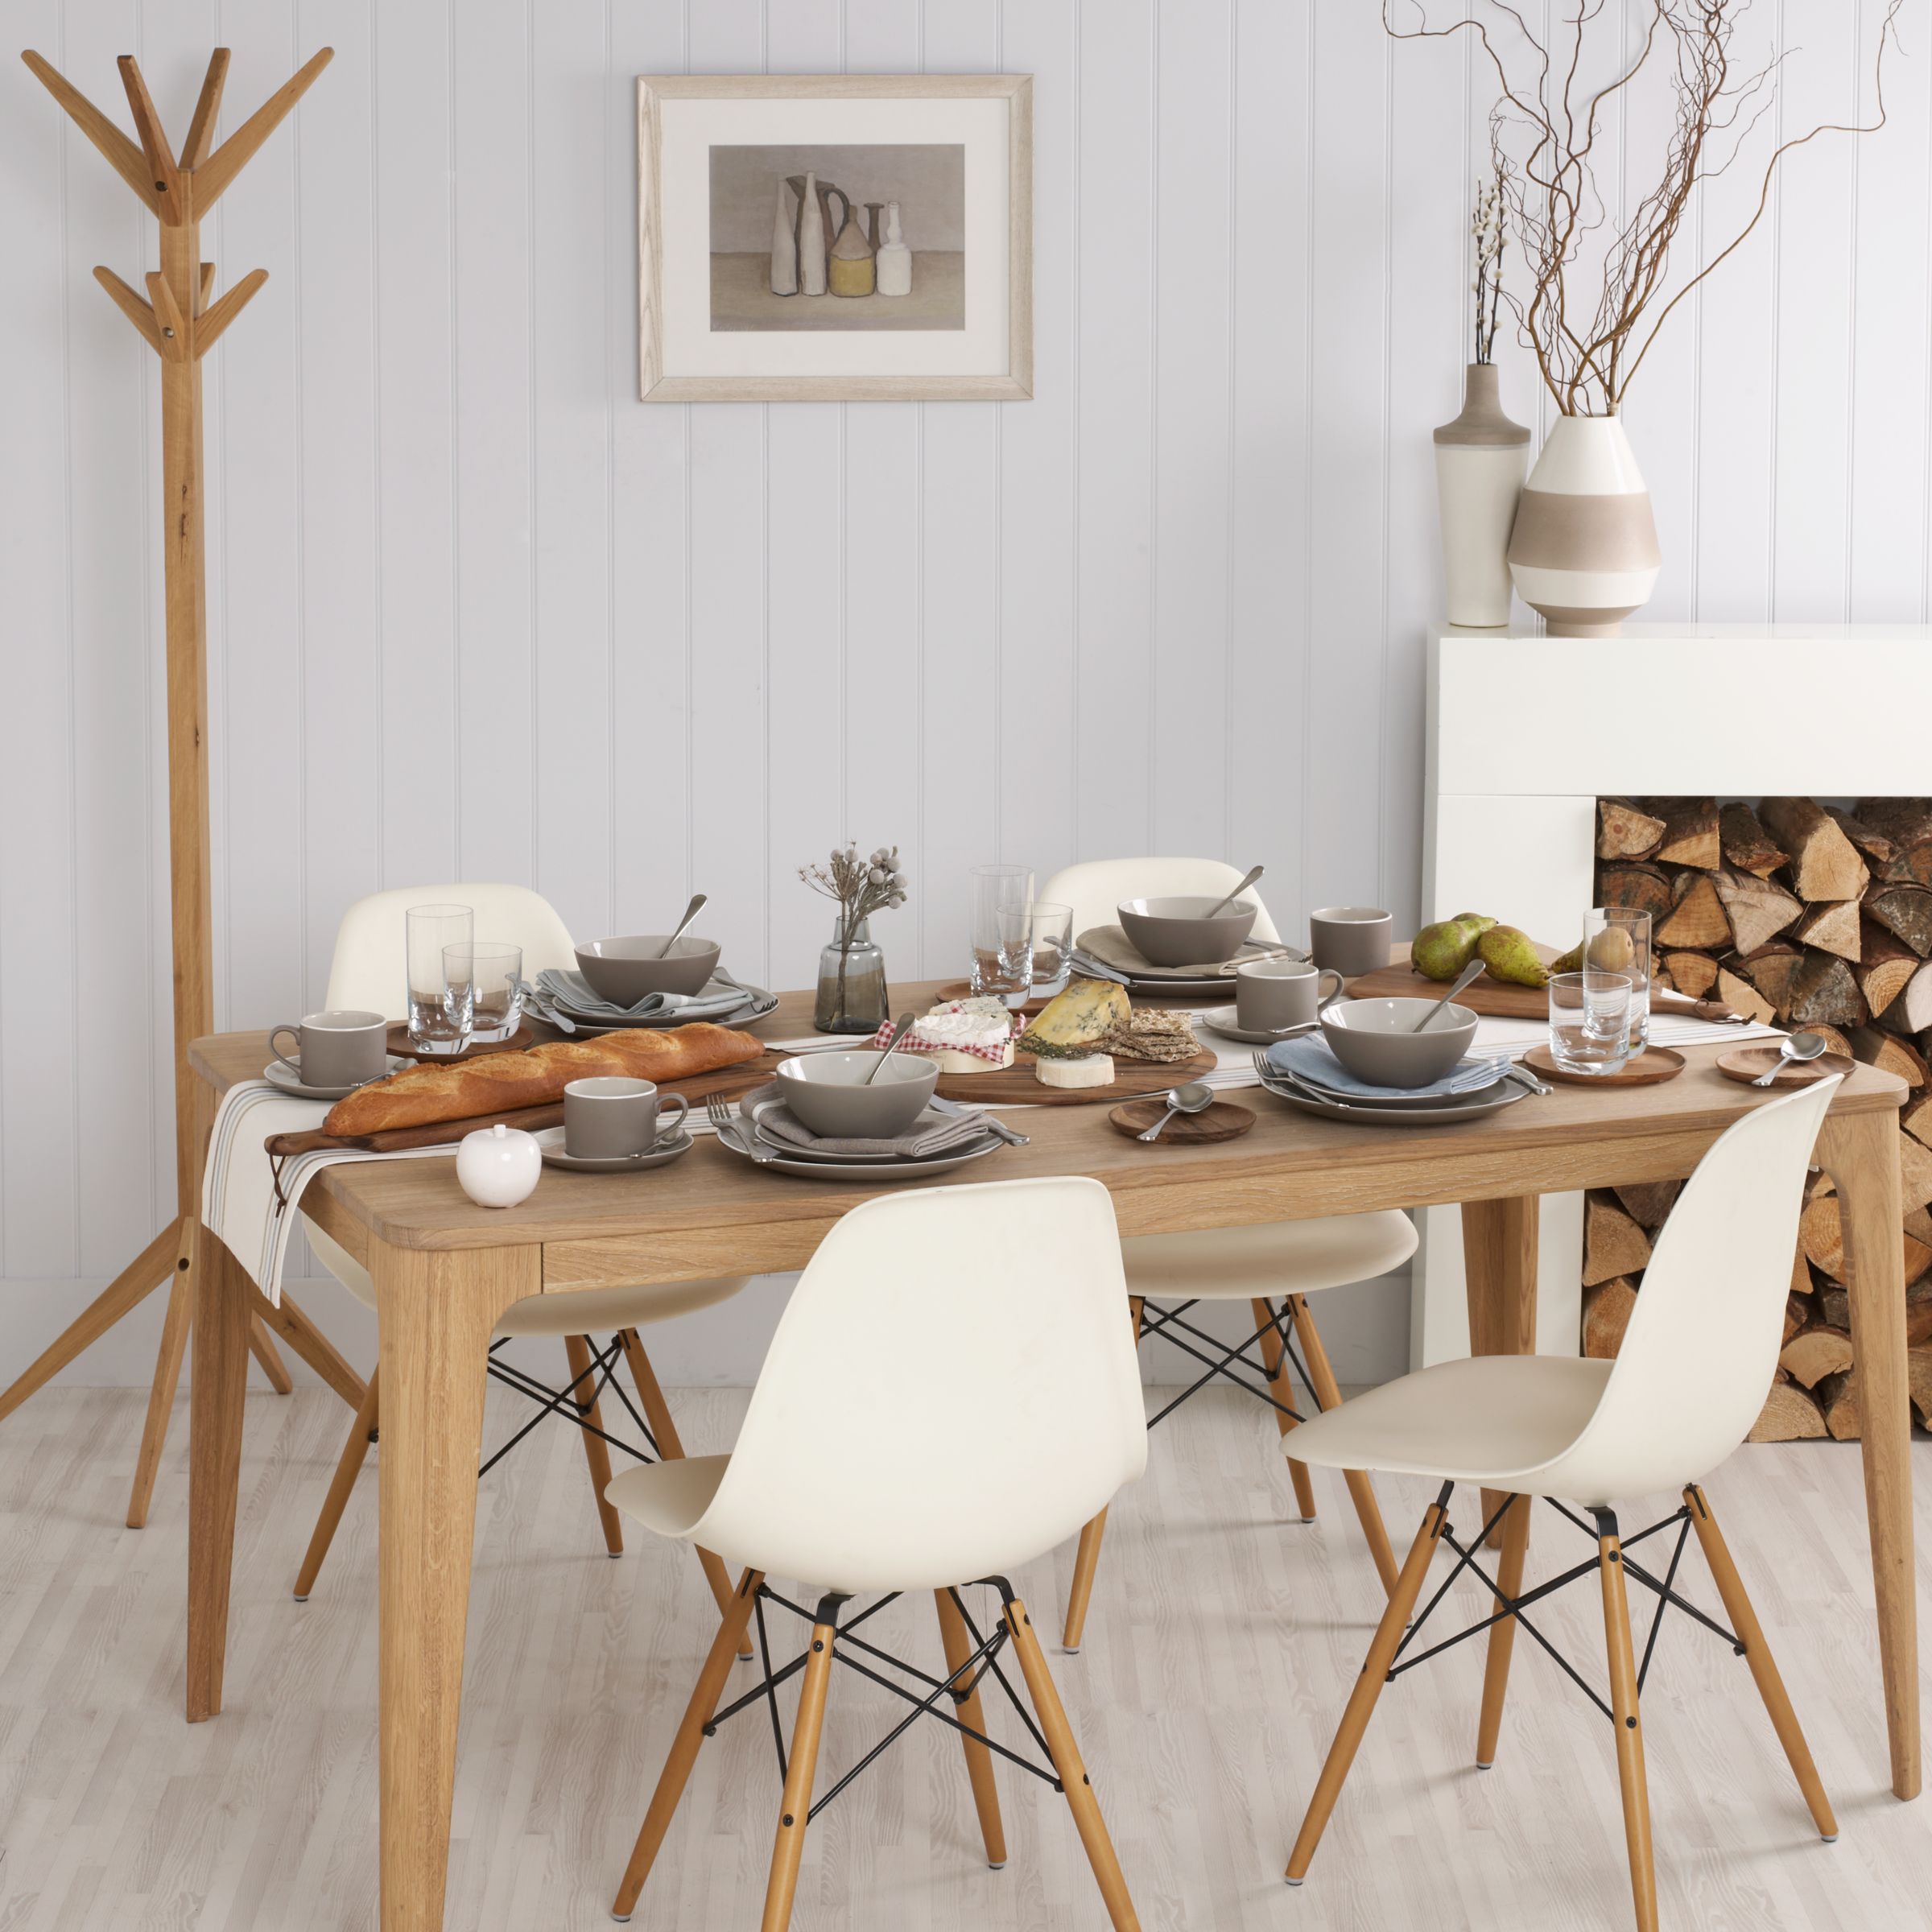 Ebbe Gehl For John Lewis Mira 6 Seater Dining Table